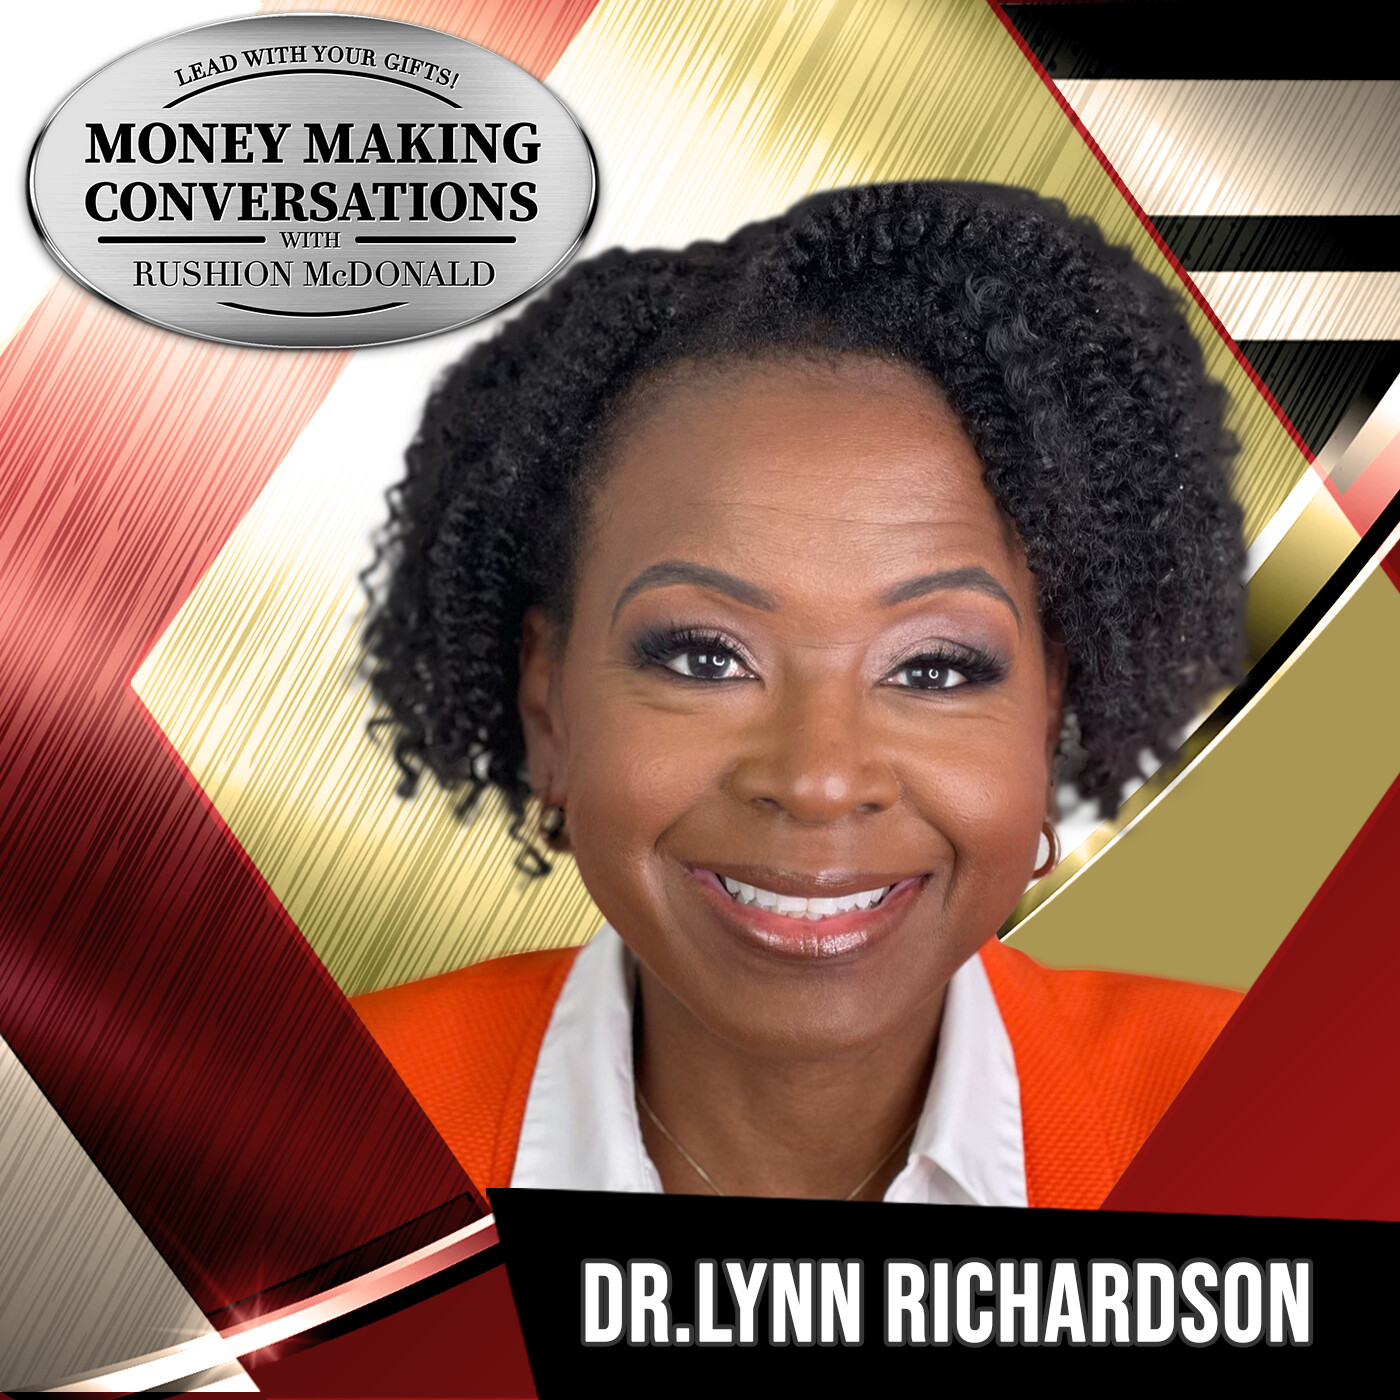 Dr. Lynn Richardson shares how to invest even while living on food stamps!